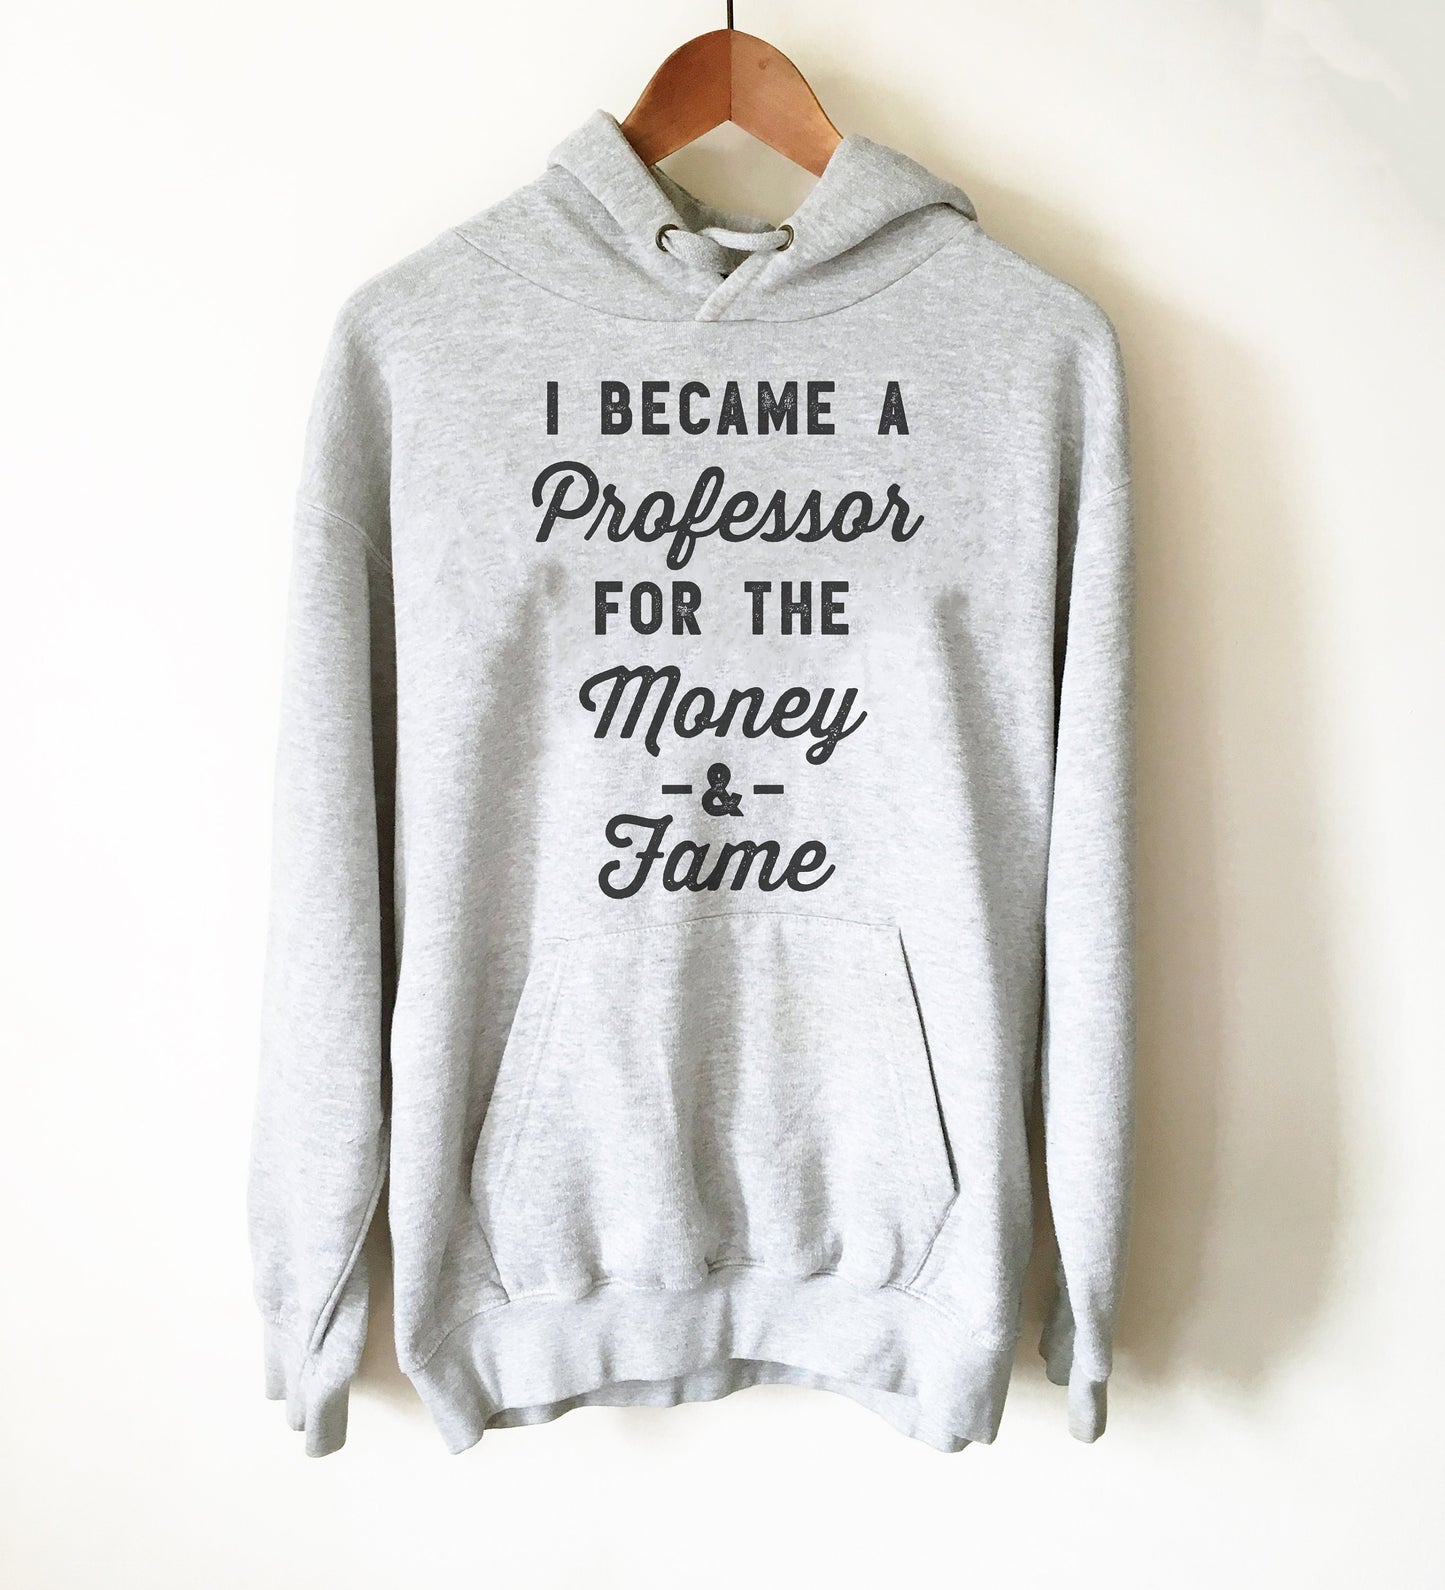 I Became A Professor For The Money & Fame Hoodie - Professor Shirt, Professor Gift, Phd Gift, Doctor Shirt, Doctorate Shirt, Graduation Gift